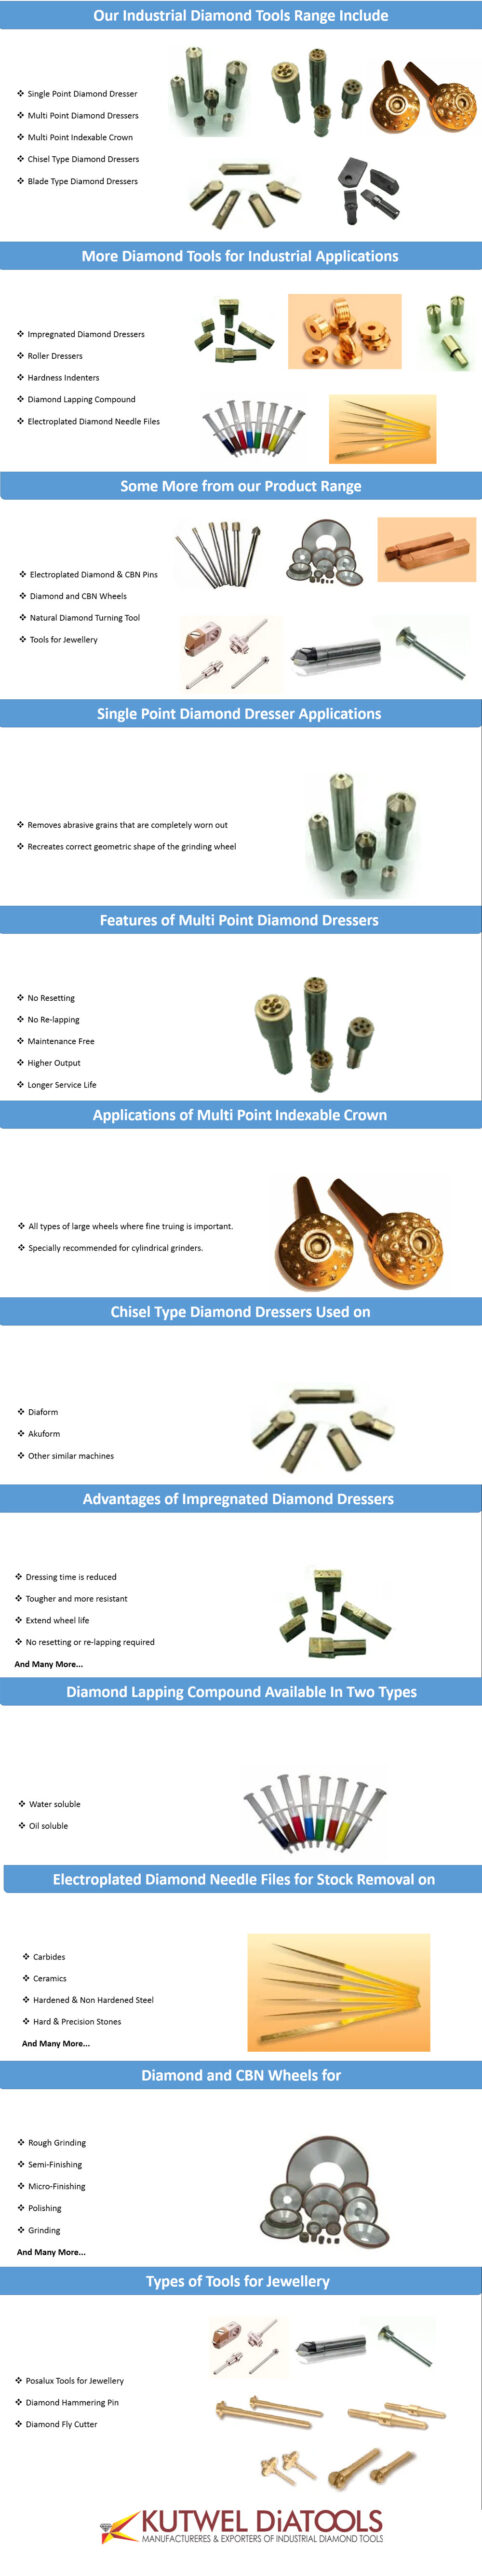 Leading Manufacturer And Exporter of Industrial Diamond Tools